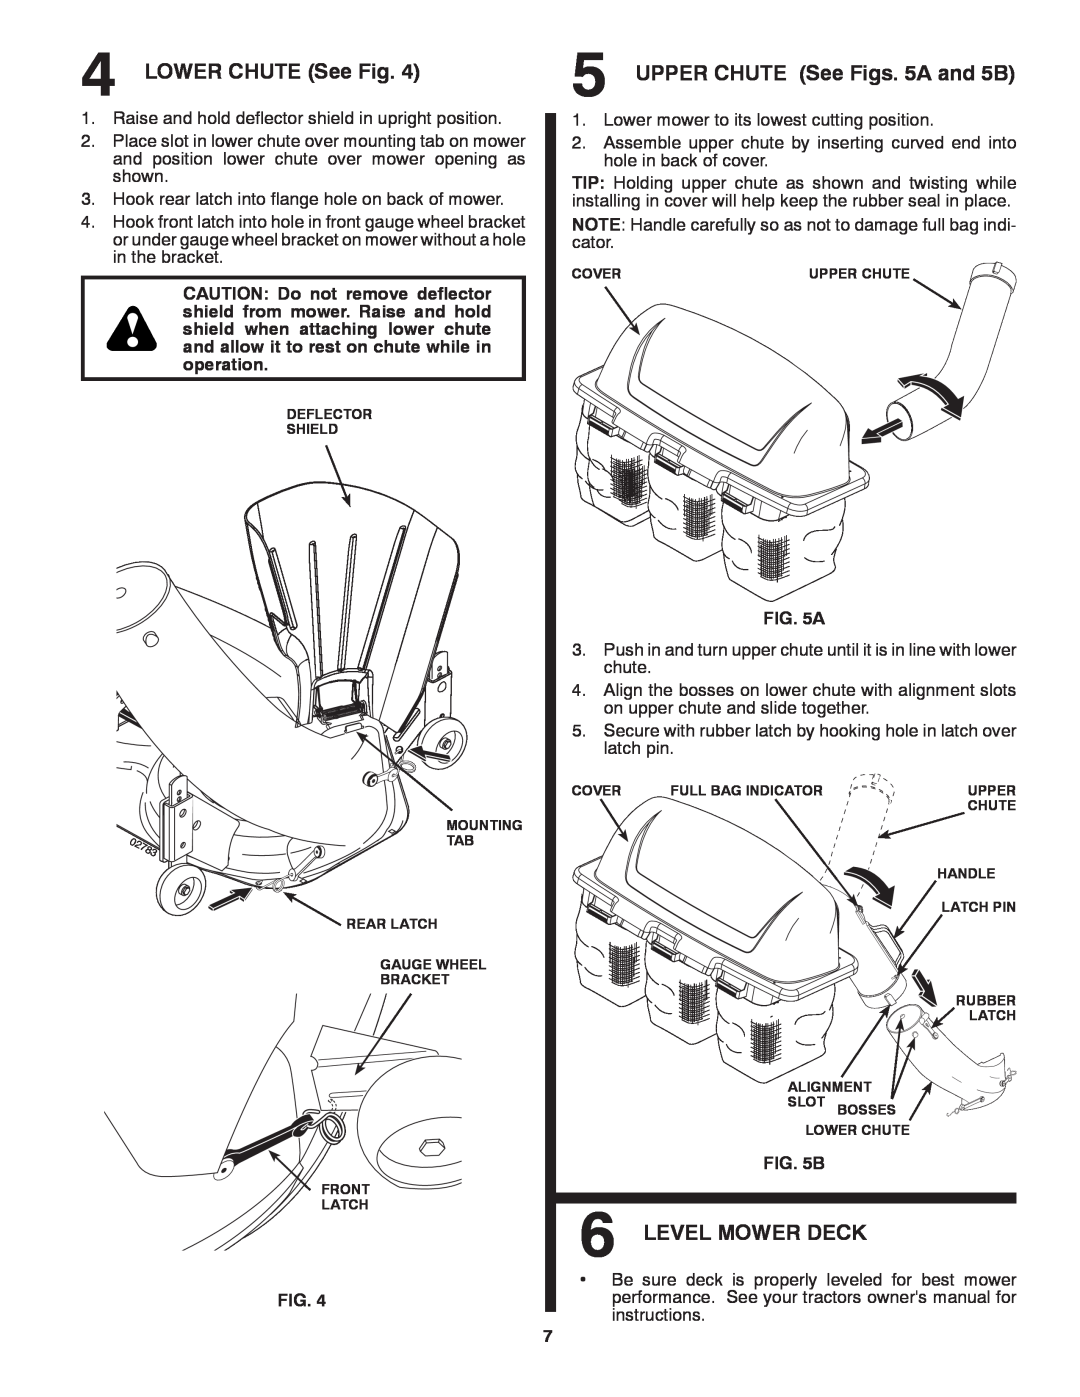 Husqvarna H354SLG owner manual LOWER CHUTE See Fig, UPPER CHUTE See Figs. 5A and 5B, Level Mower Deck 